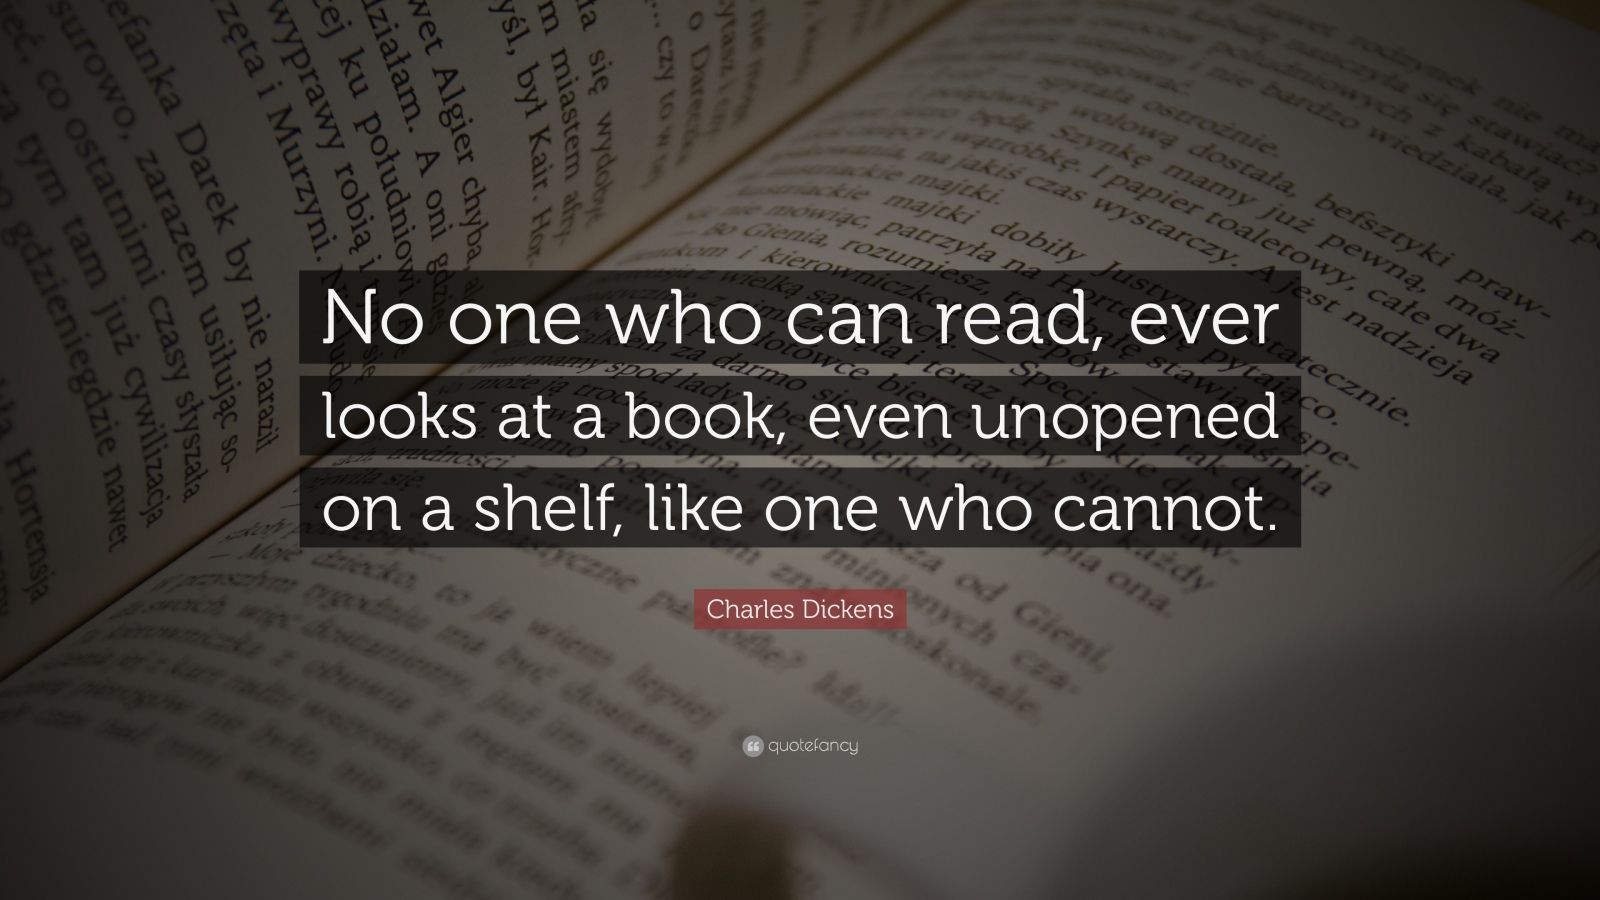 Charles Dickens Quote: “No one who can read, ever looks at a book, even